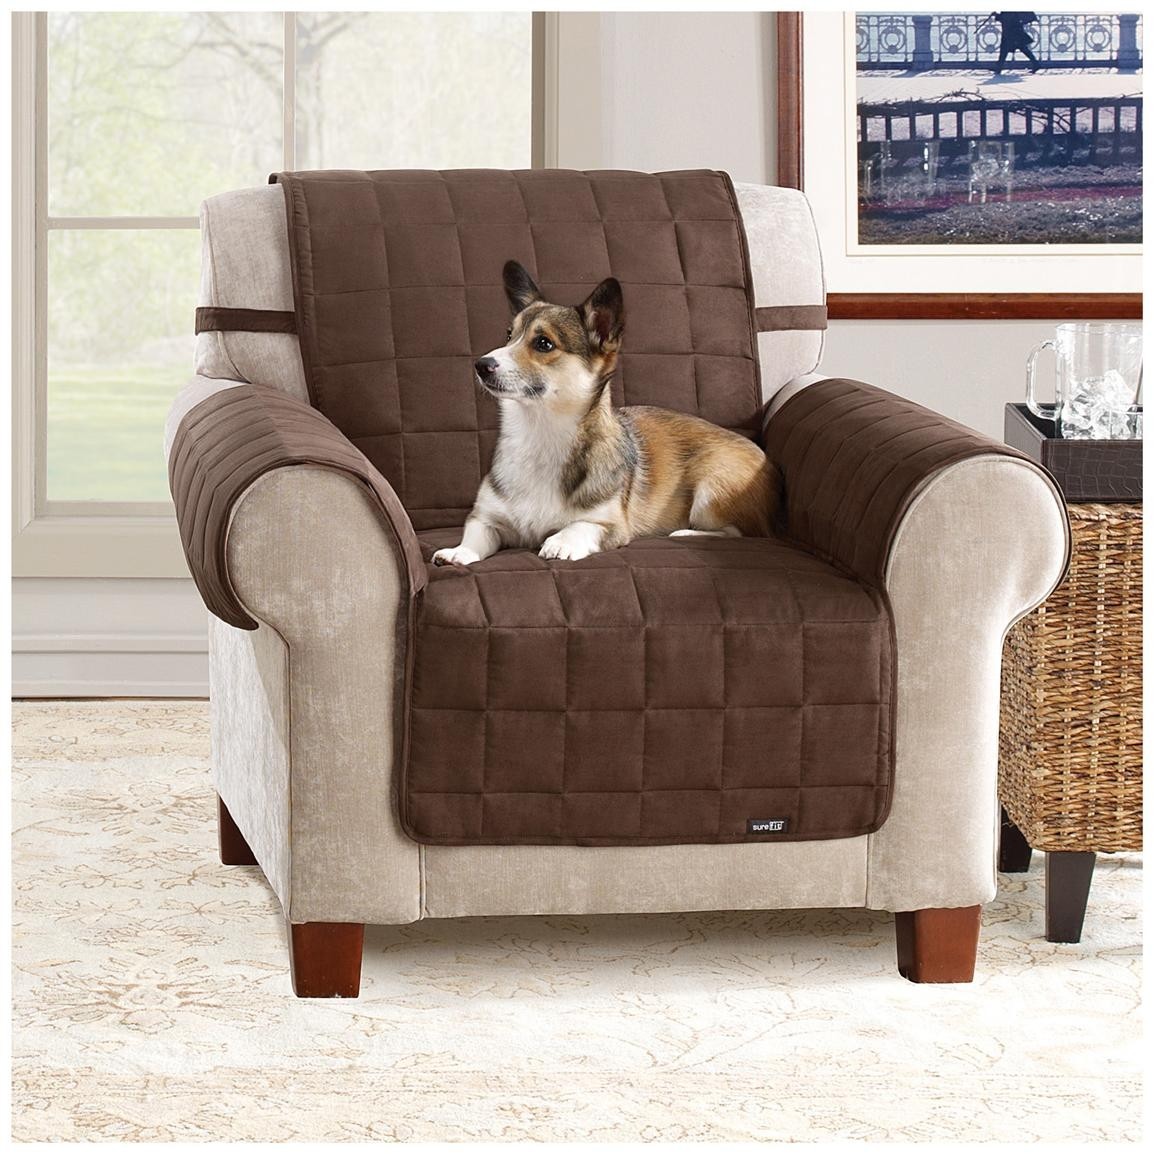 Chair Cover Recliners Slipcover Chair protector For Pets Brown